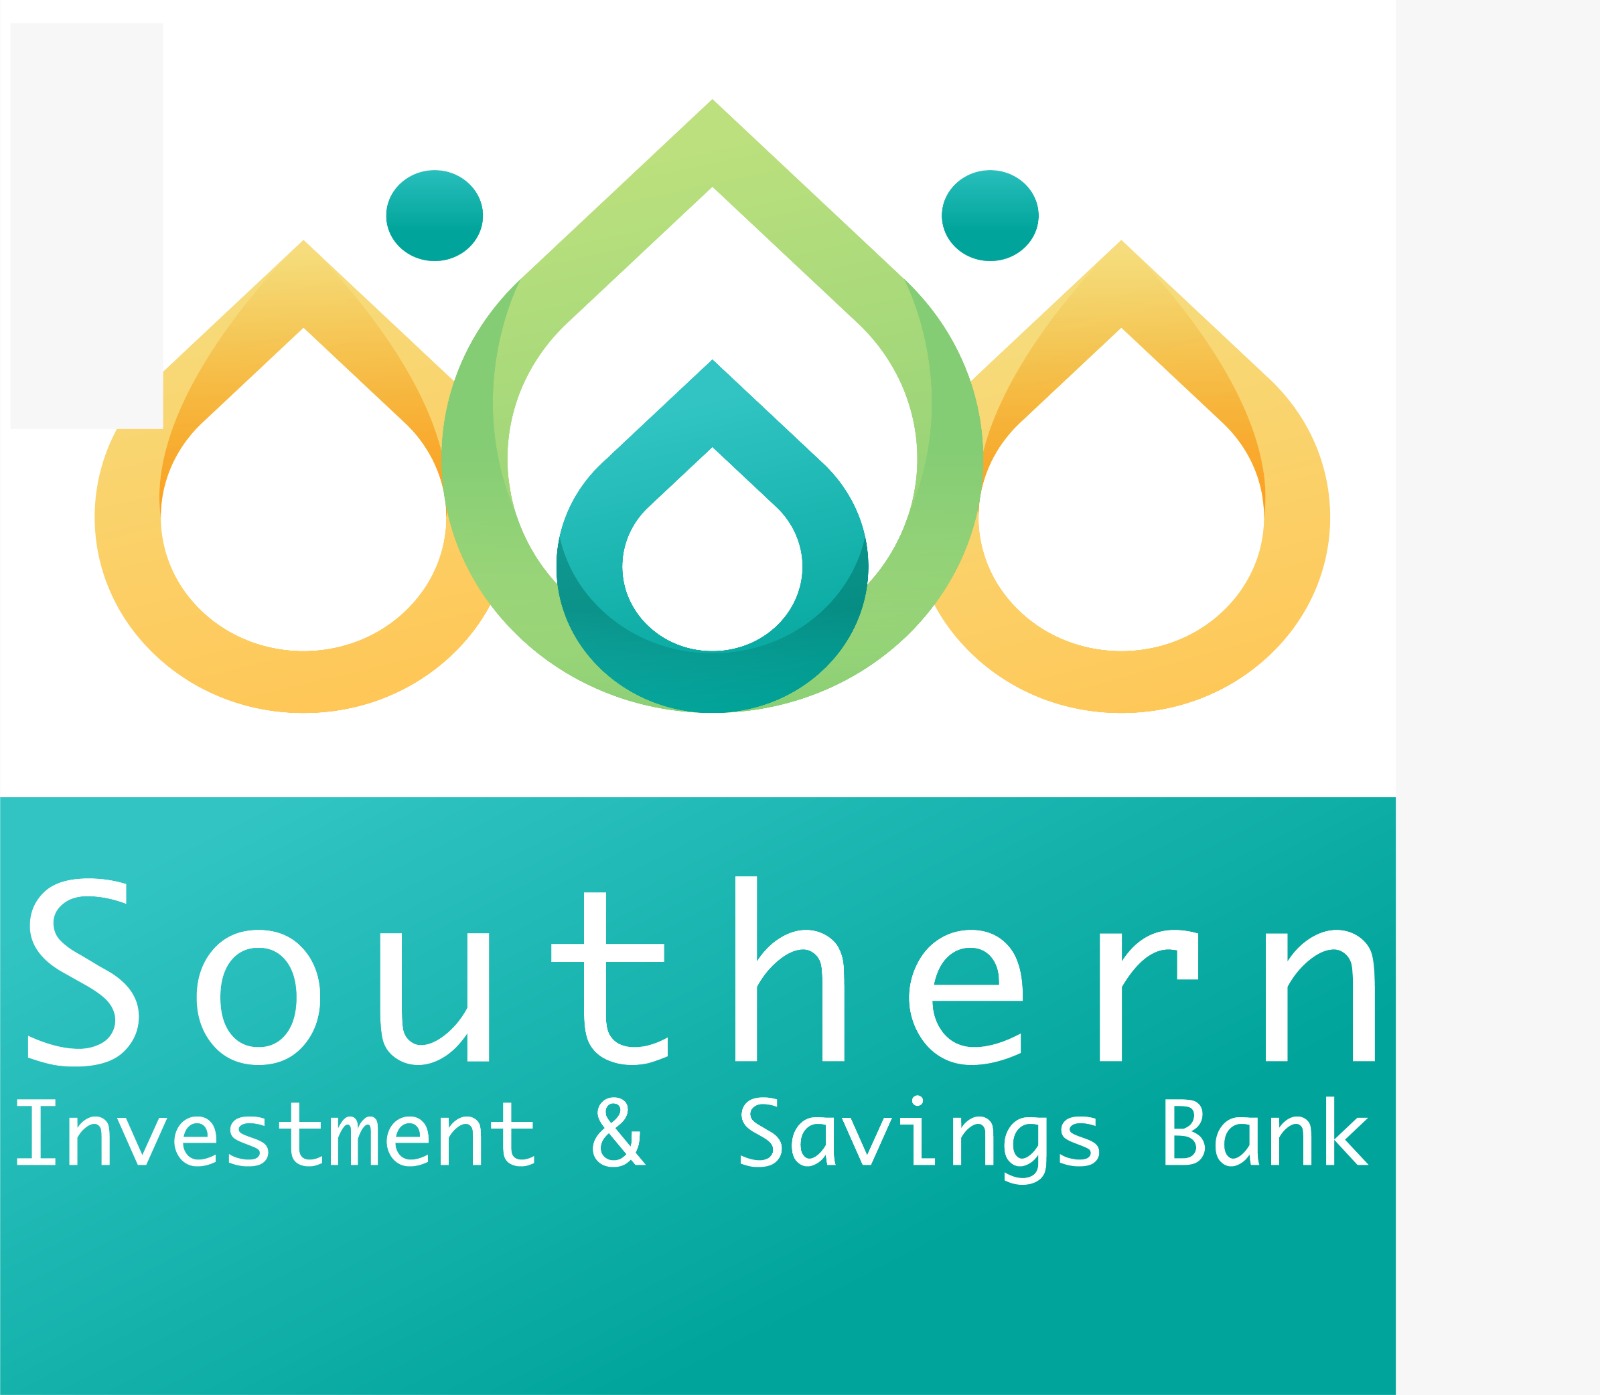 Southern Investment and Savings Bank